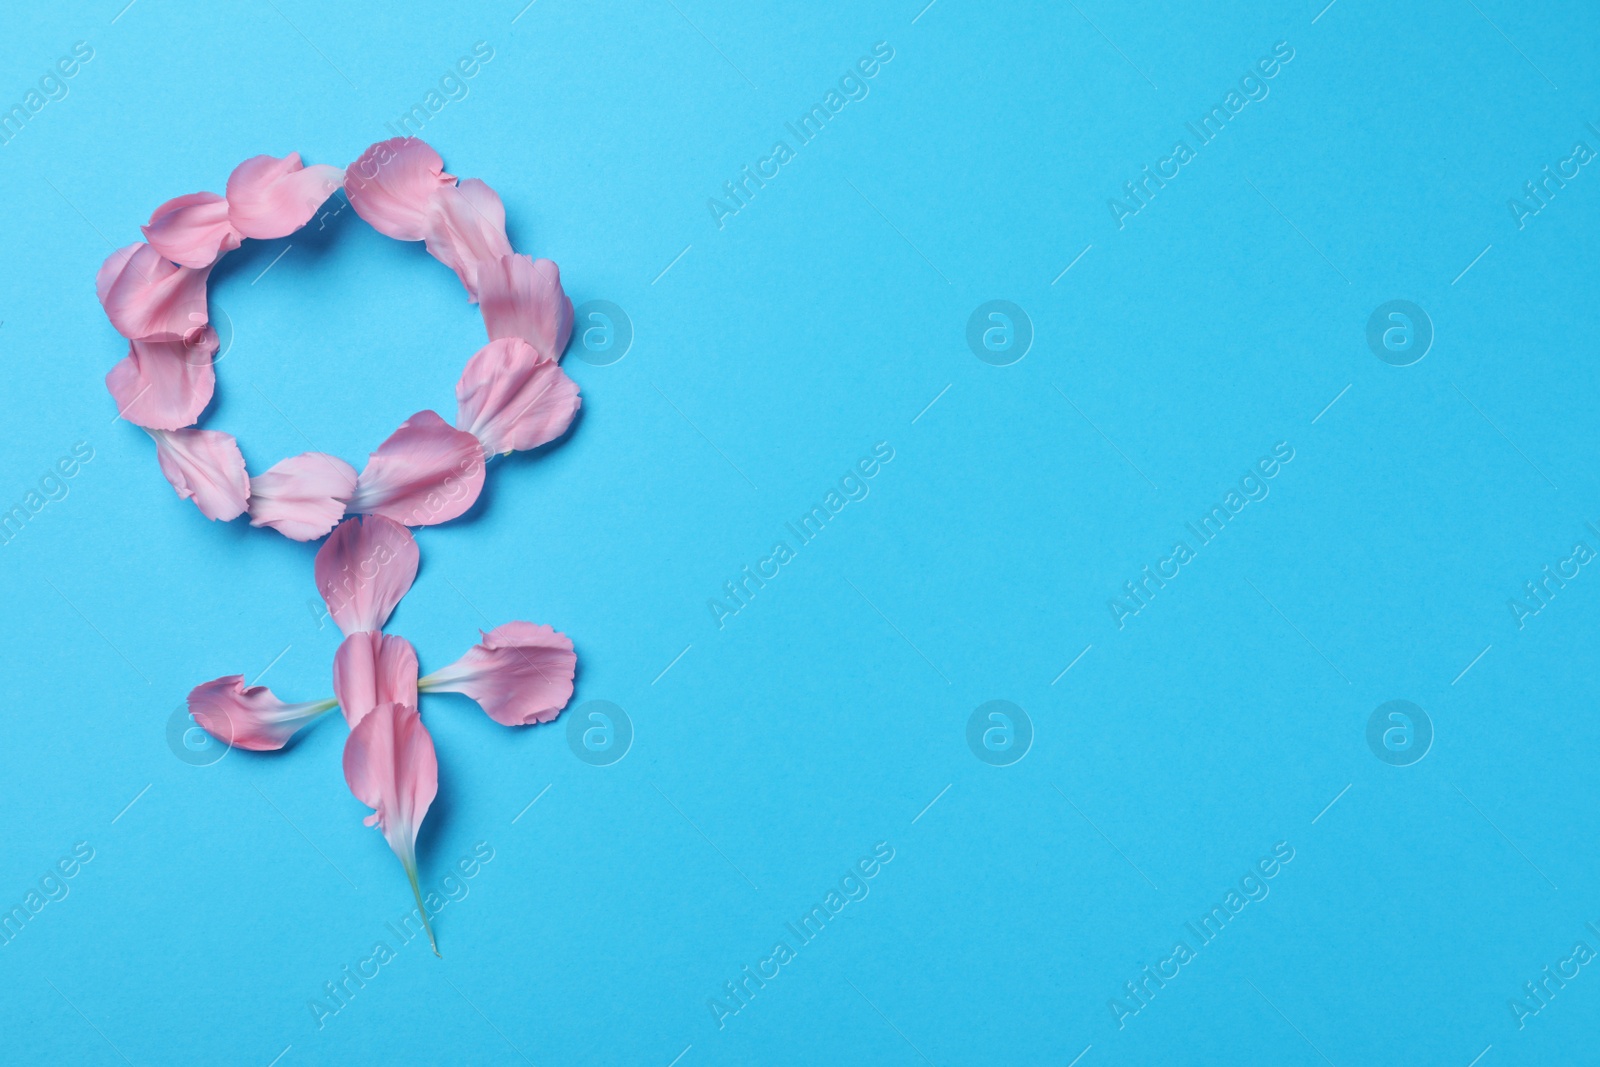 Photo of Female gender sign made of petals on light blue background, top view and space for text. Women's health concept